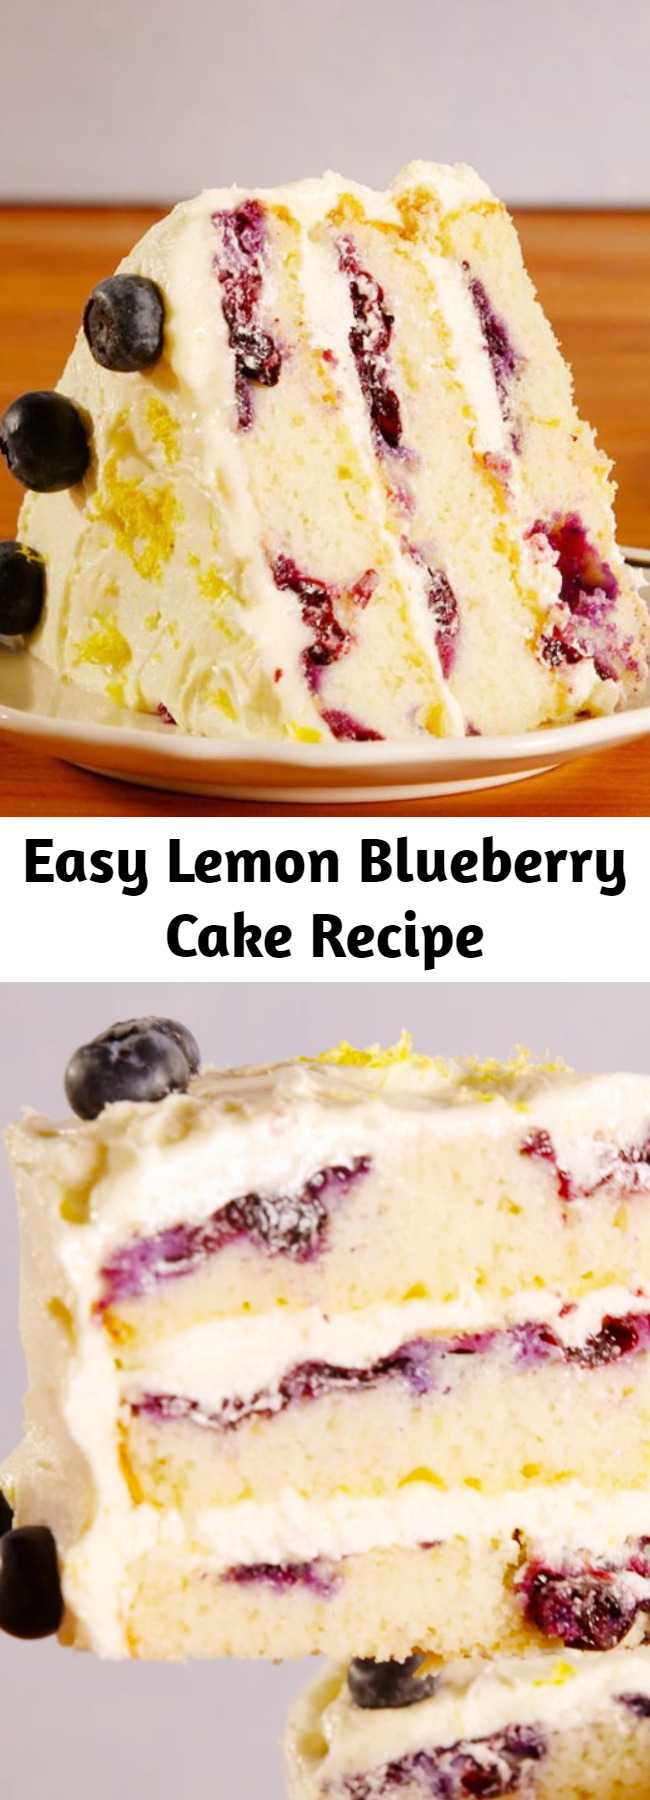 Easy Lemon Blueberry Cake Recipe - This lemon blueberry cake is the only thing you need to bake this spring. #easy #recipe #dessert #dessertrecipes #cakerecipes #cake #lemon #blueberry #homemade #baking